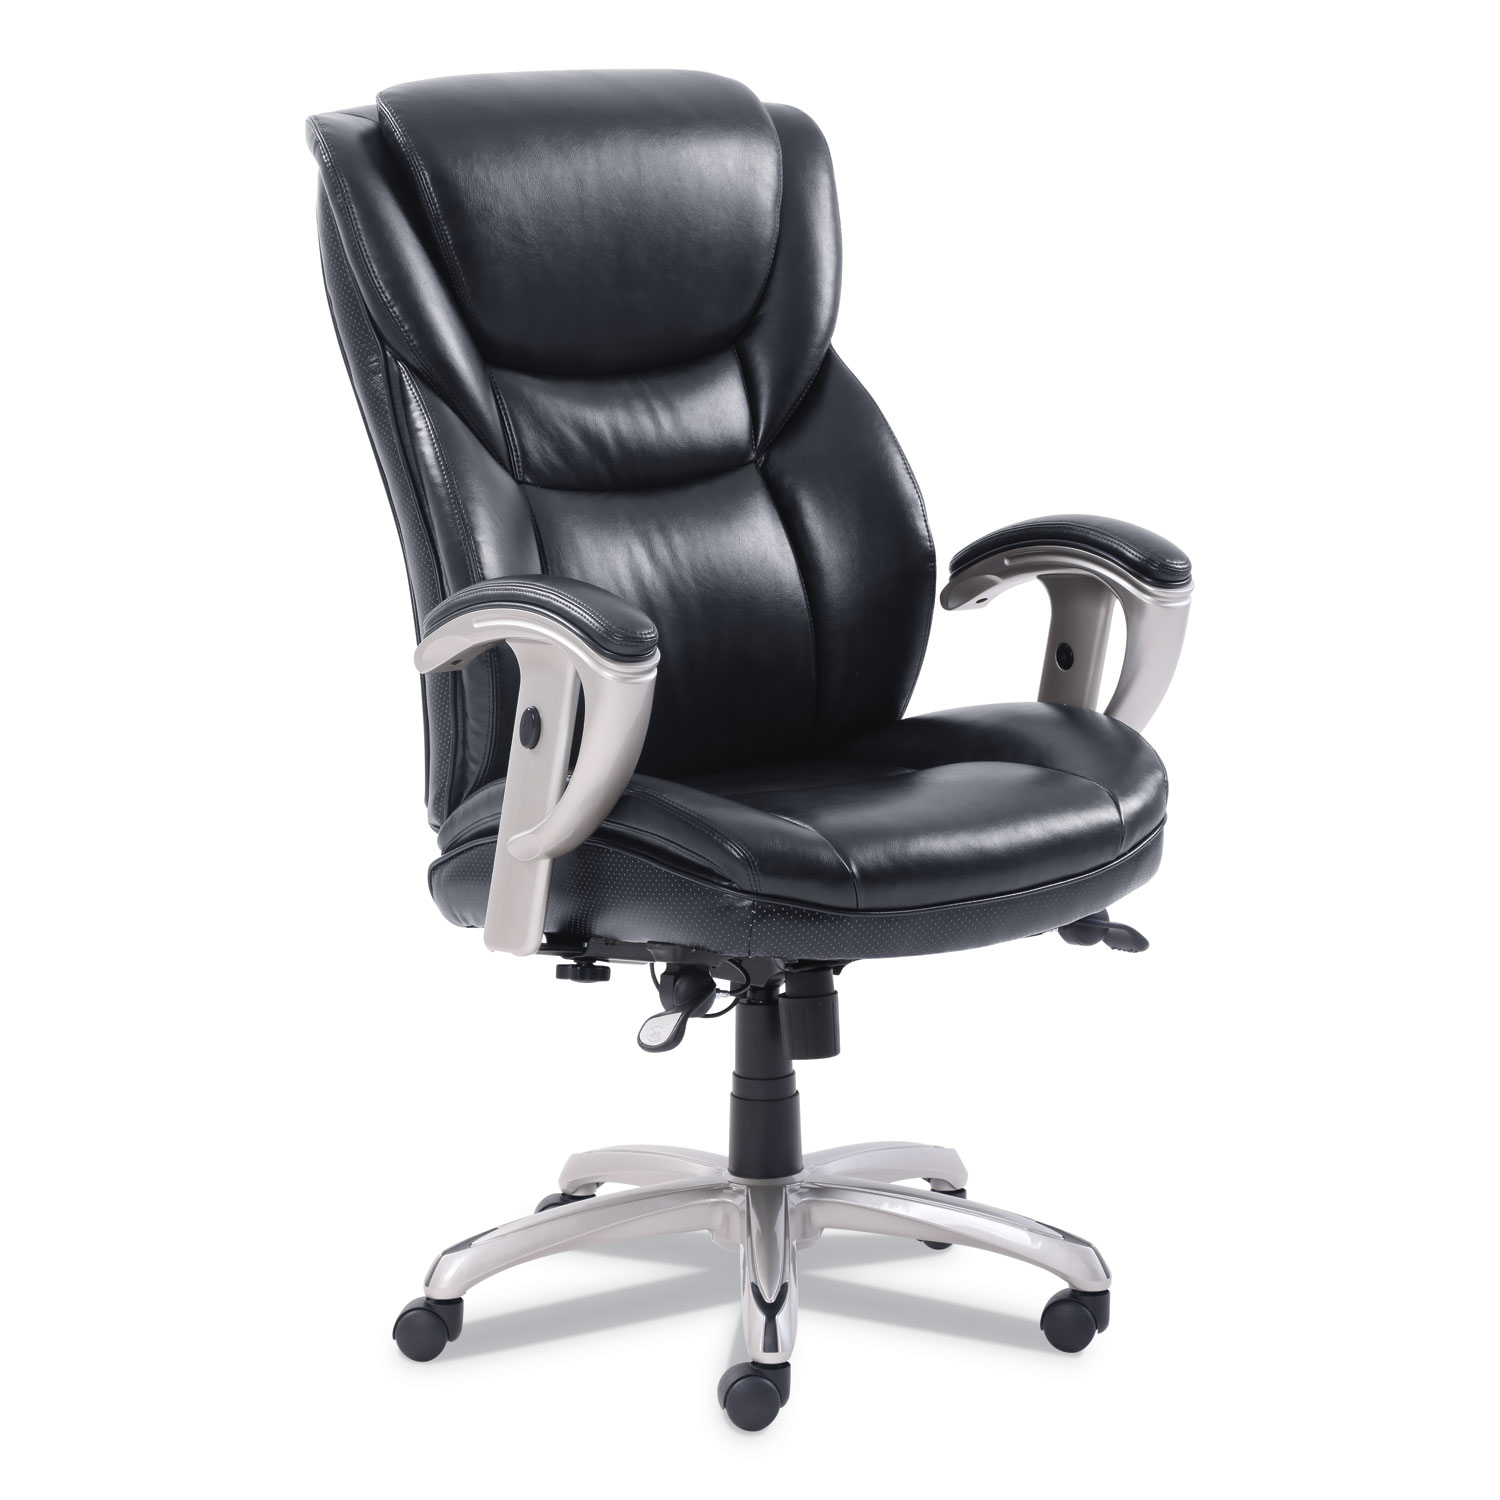  SertaPedic 49710BLK Emerson Executive Task Chair, Supports up to 300 lbs., Black Seat/Black Back, Silver Base (SRJ49710BLK) 